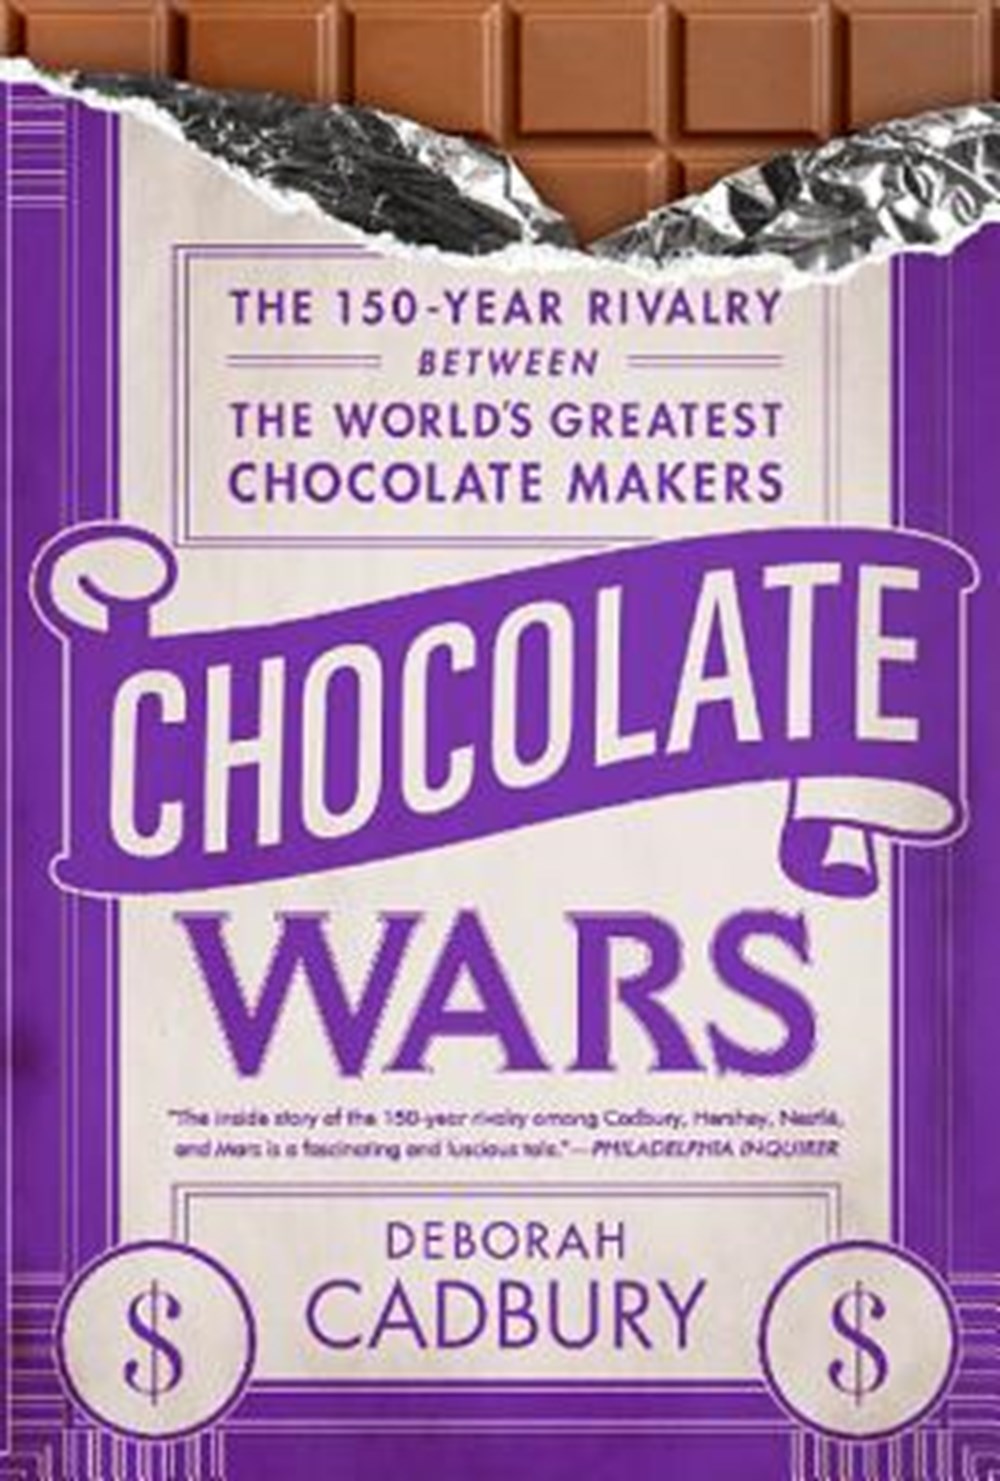 Chocolate Wars The 150-Year Rivalry Between the World's Greatest Chocolate Makers